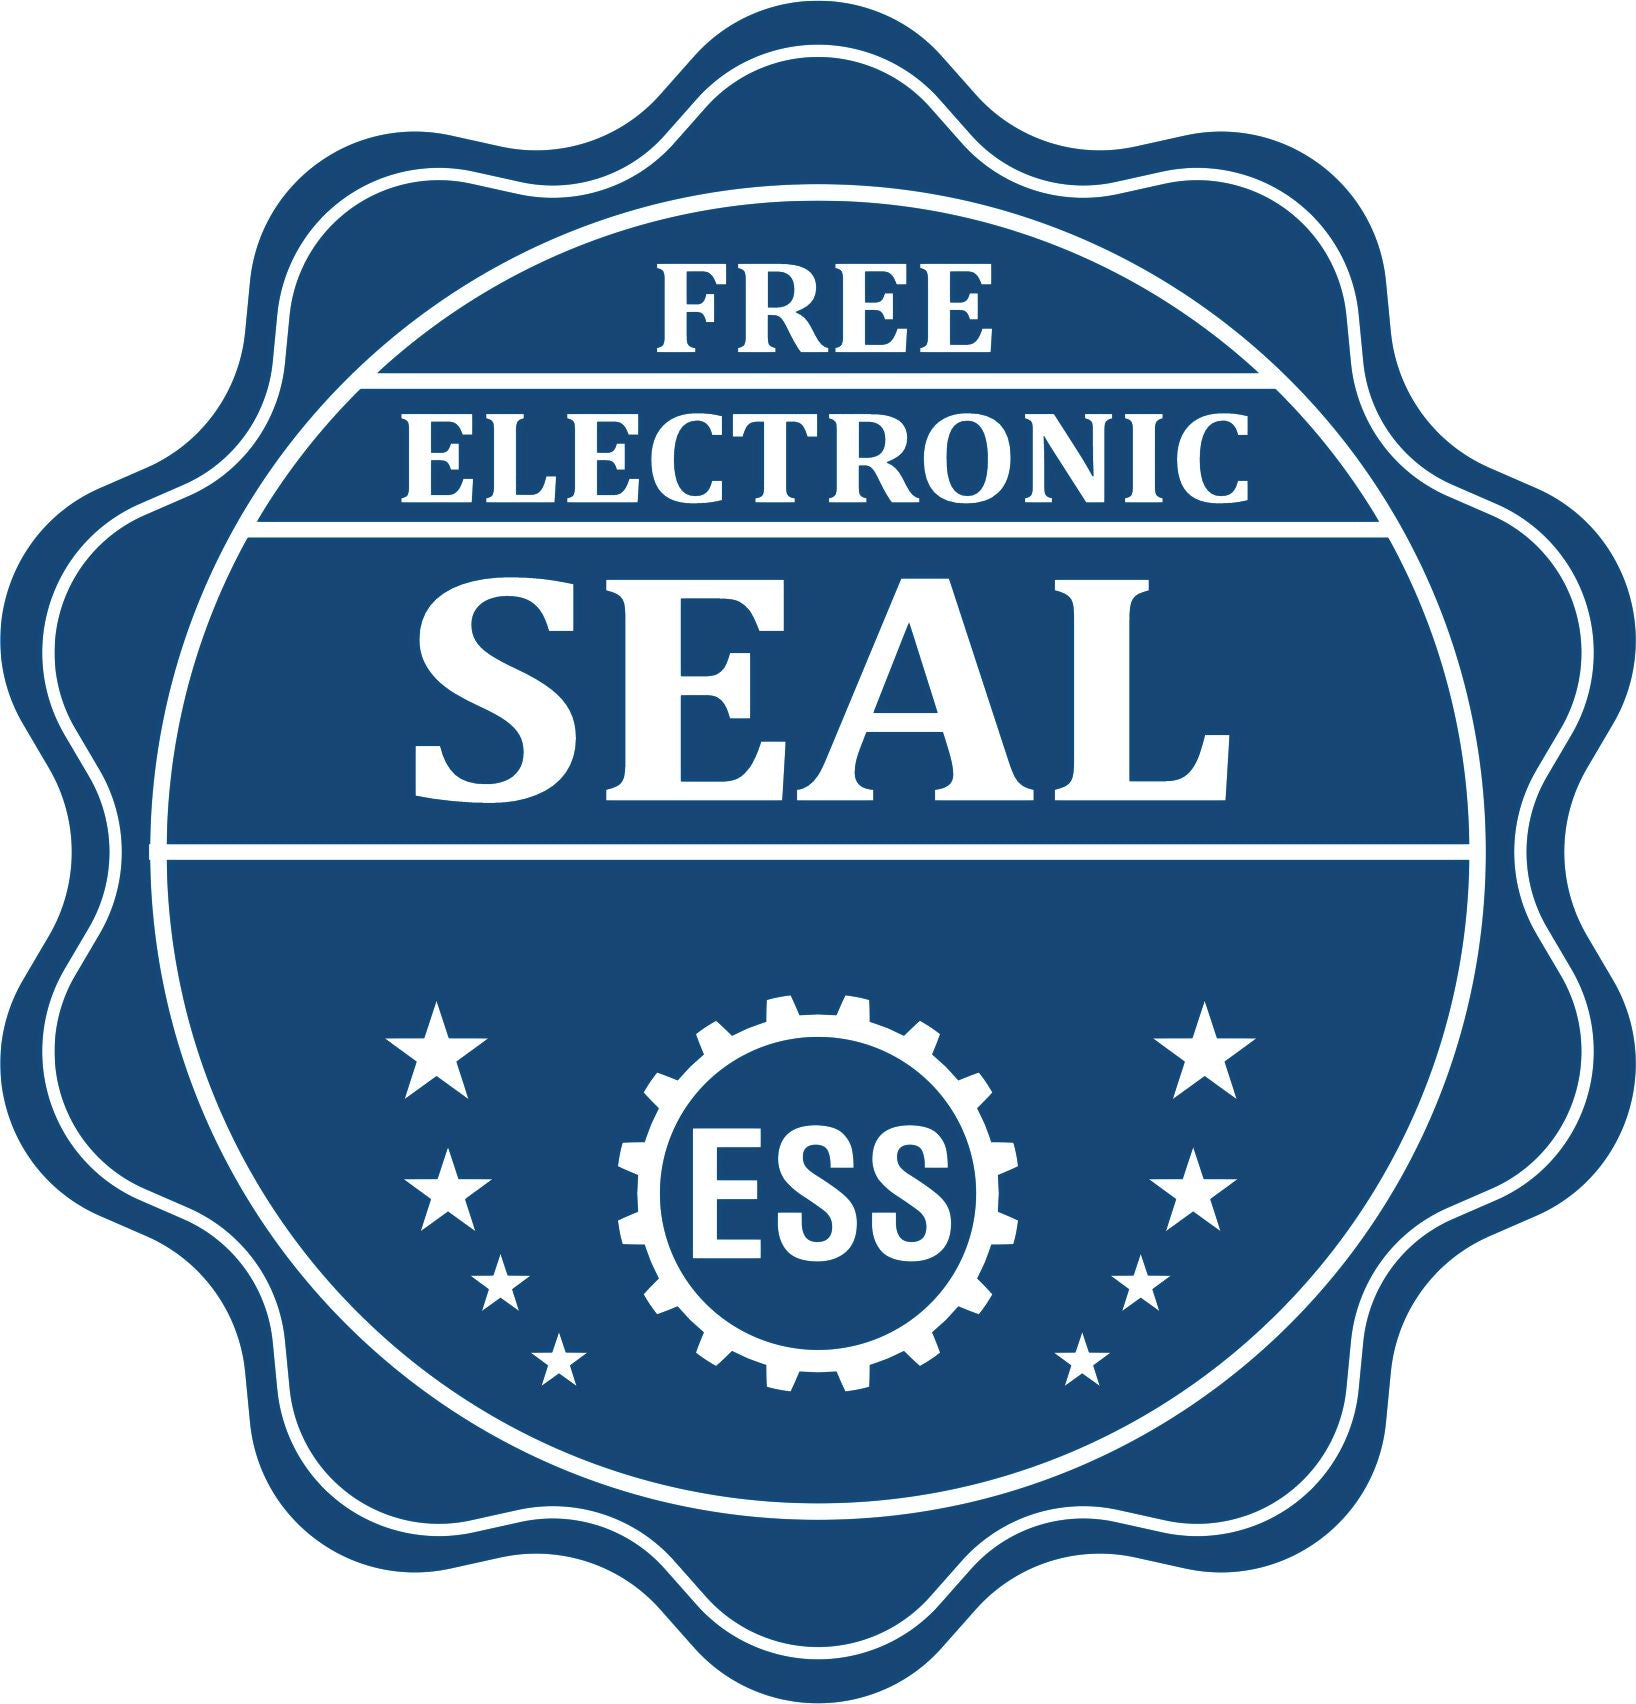 A badge showing a free electronic seal for the State of North Carolina Soft Land Surveyor Embossing Seal with stars and the ESS gear on the emblem.